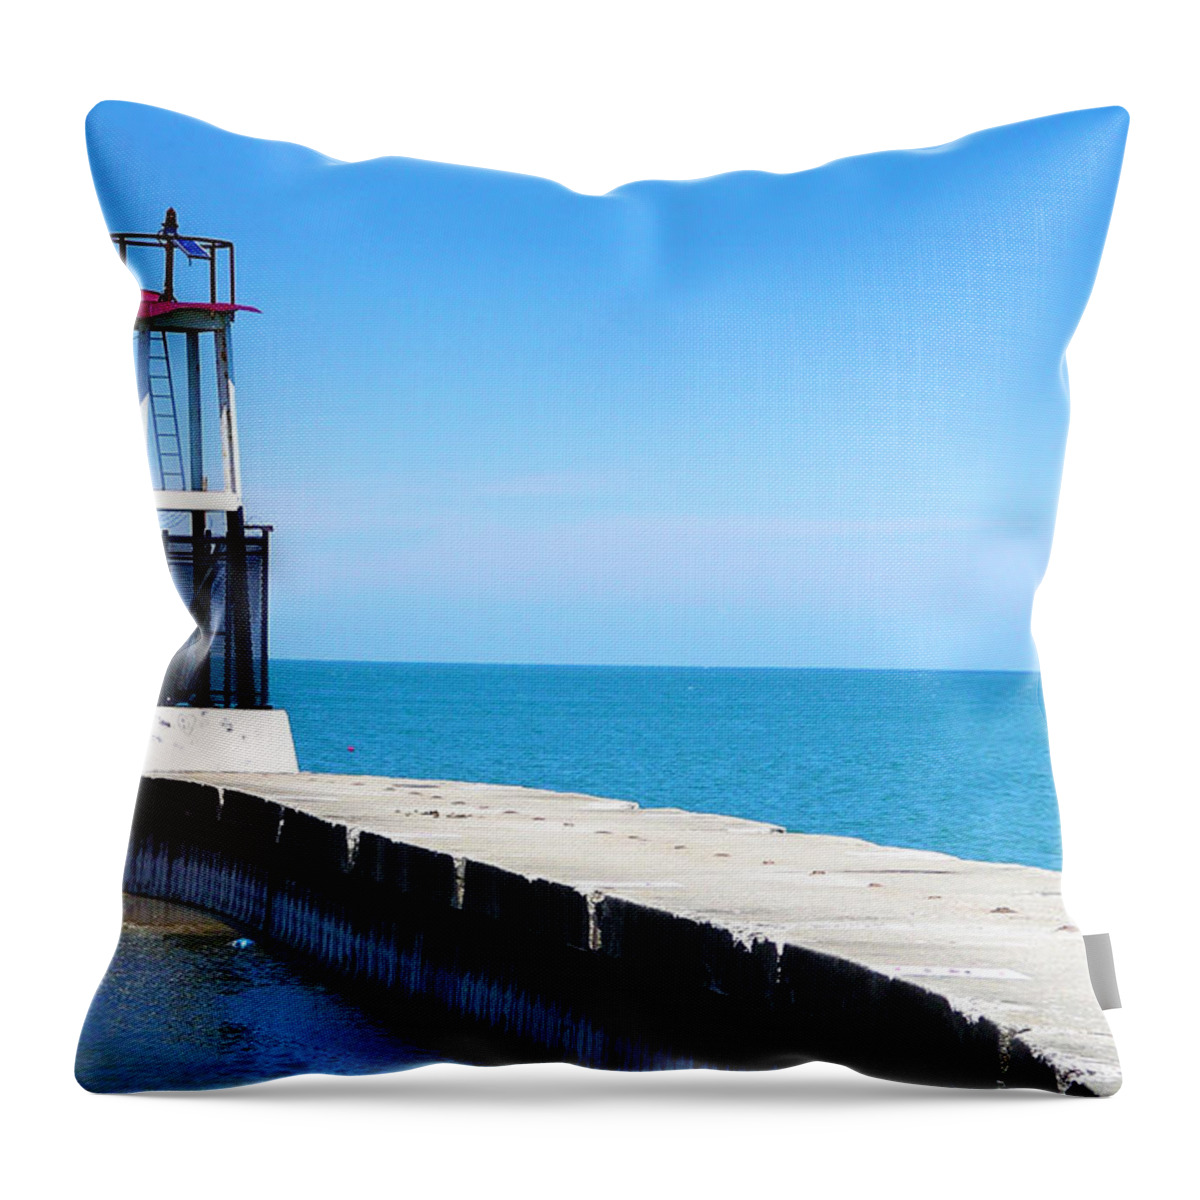 Architecture Throw Pillow featuring the photograph Chicago Skyline North Avenue Beach Pier #2 by Patrick Malon